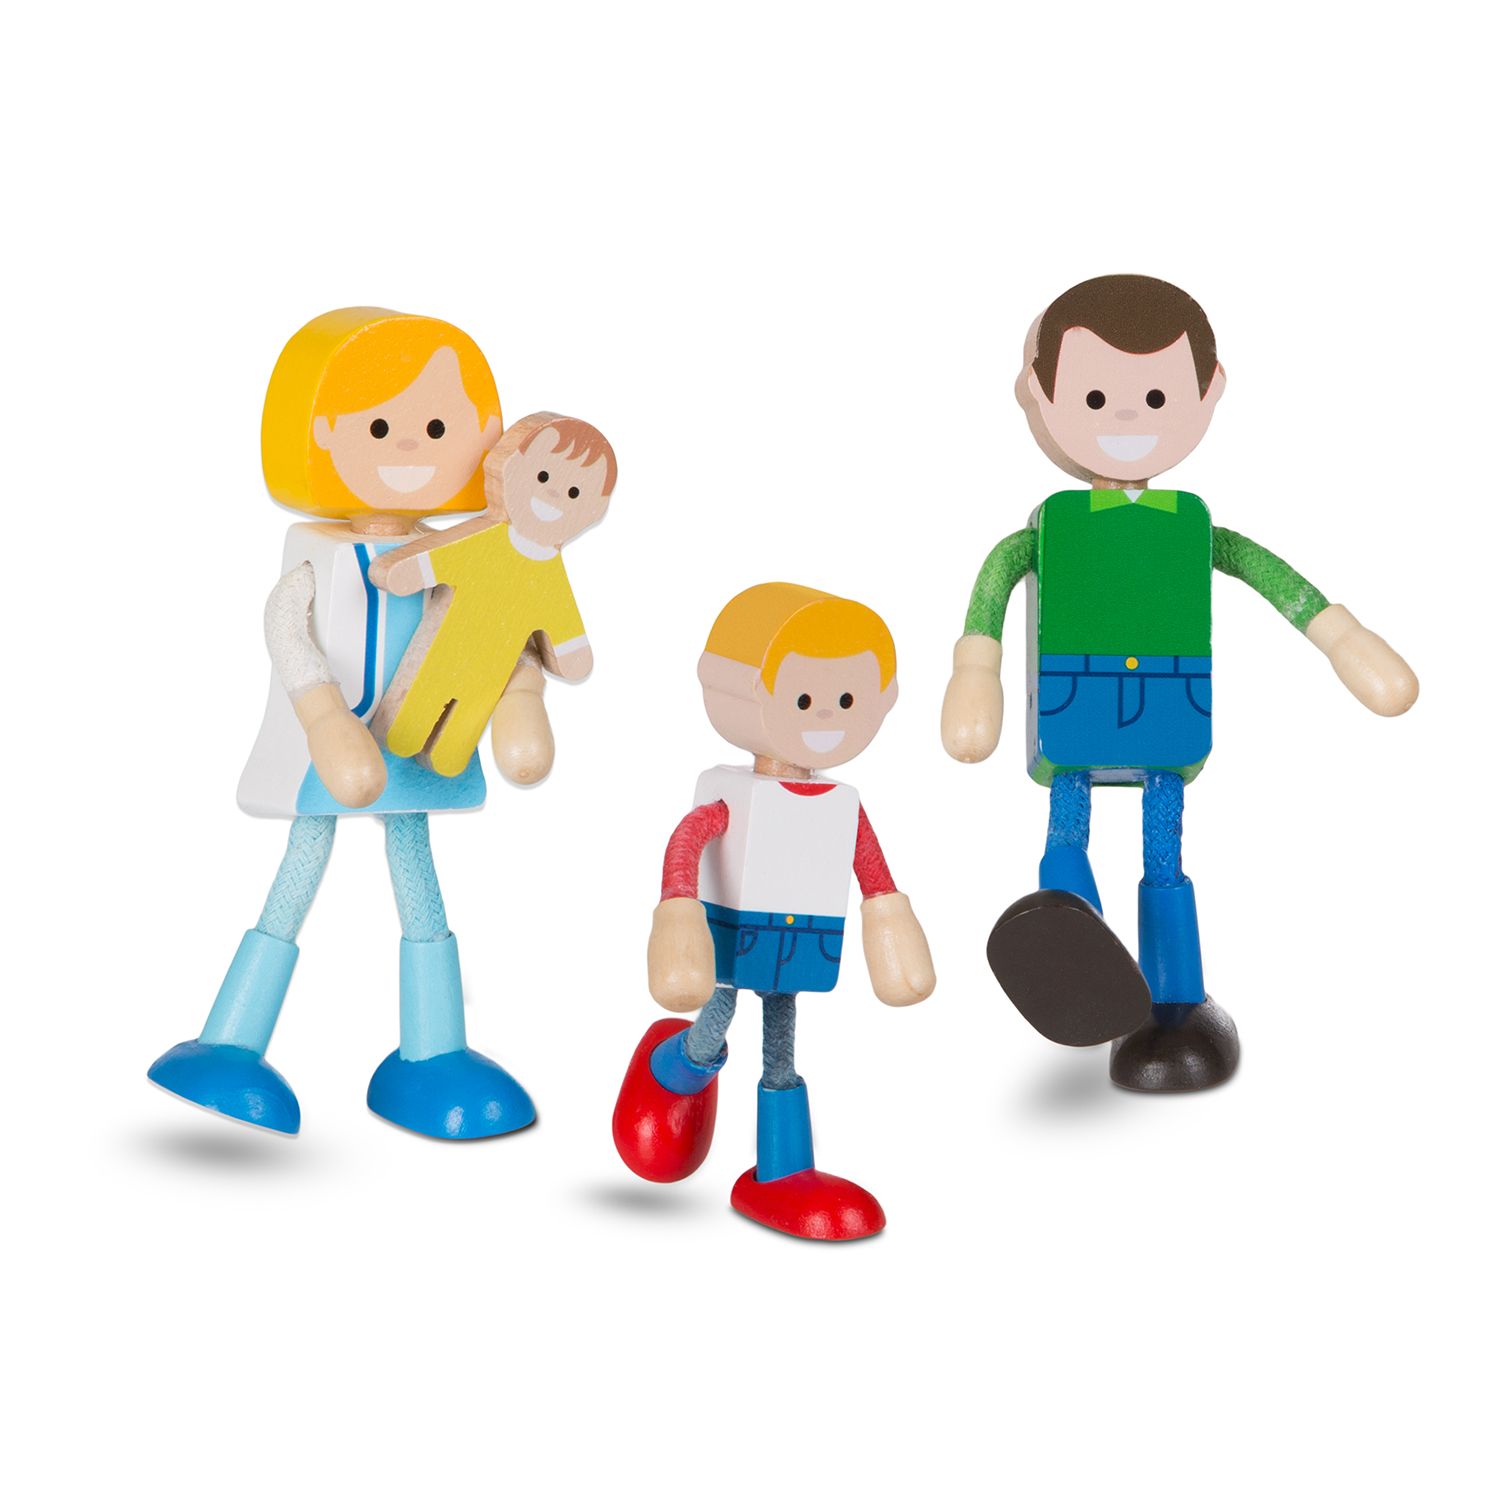 wooden family figures